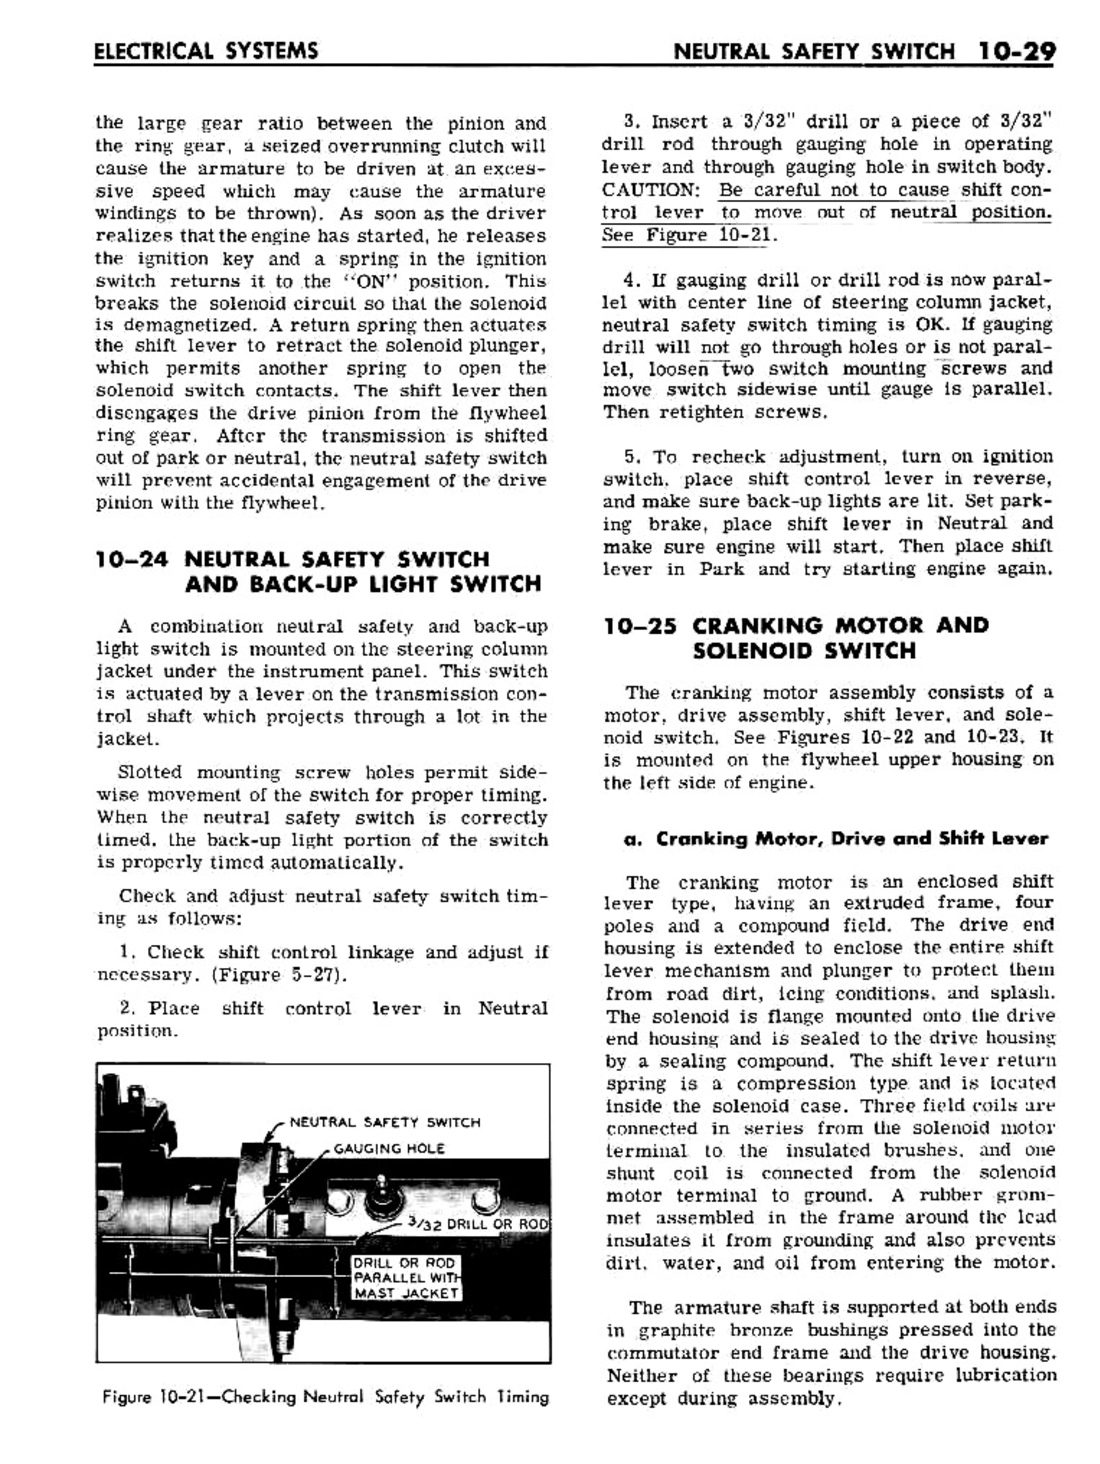 n_10 1961 Buick Shop Manual - Electrical Systems-029-029.jpg